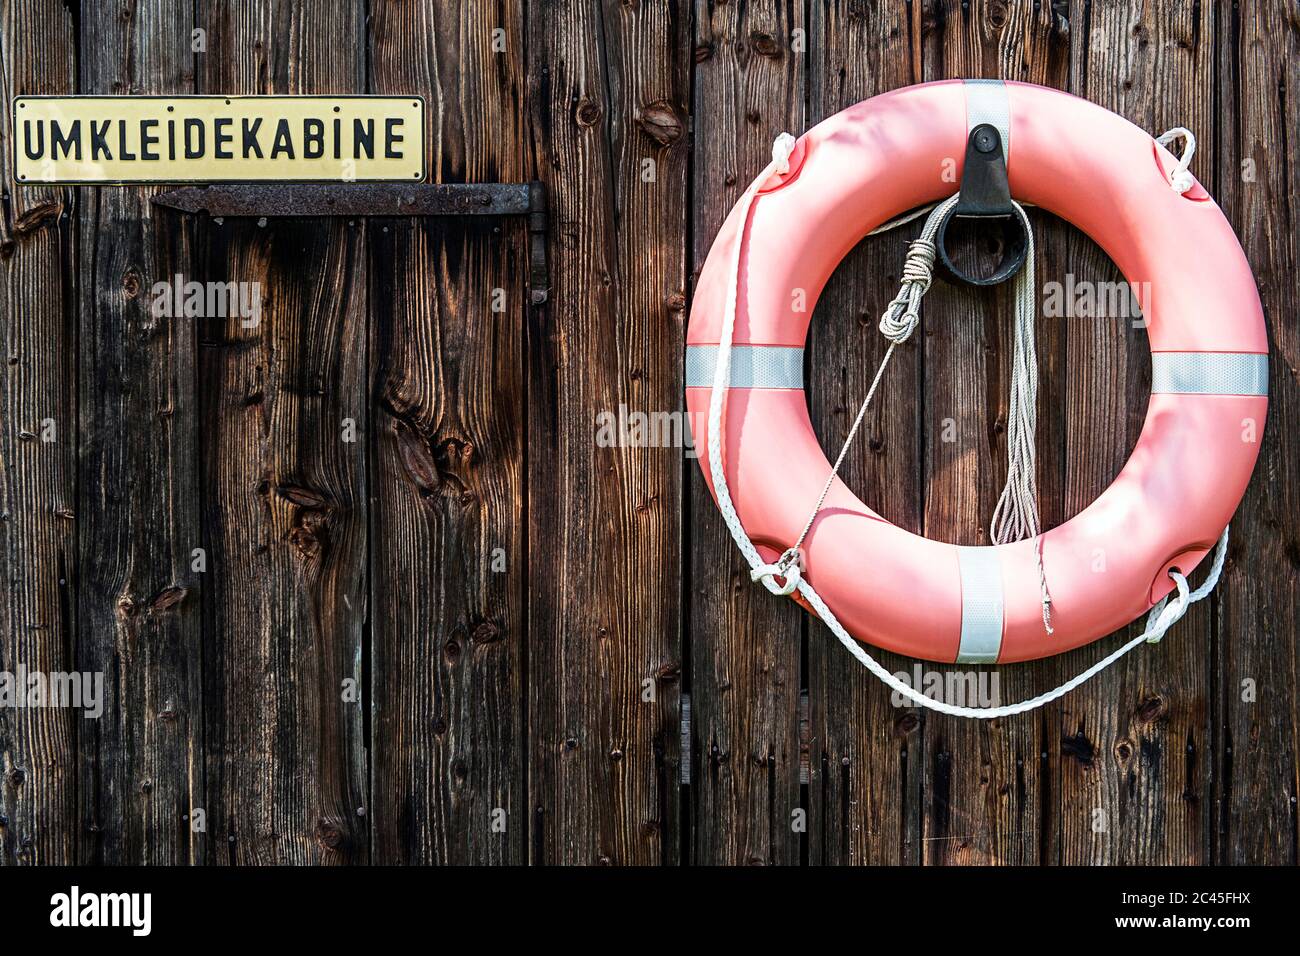 Wooden door with the locker room sign and lifebuoy Stock Photo